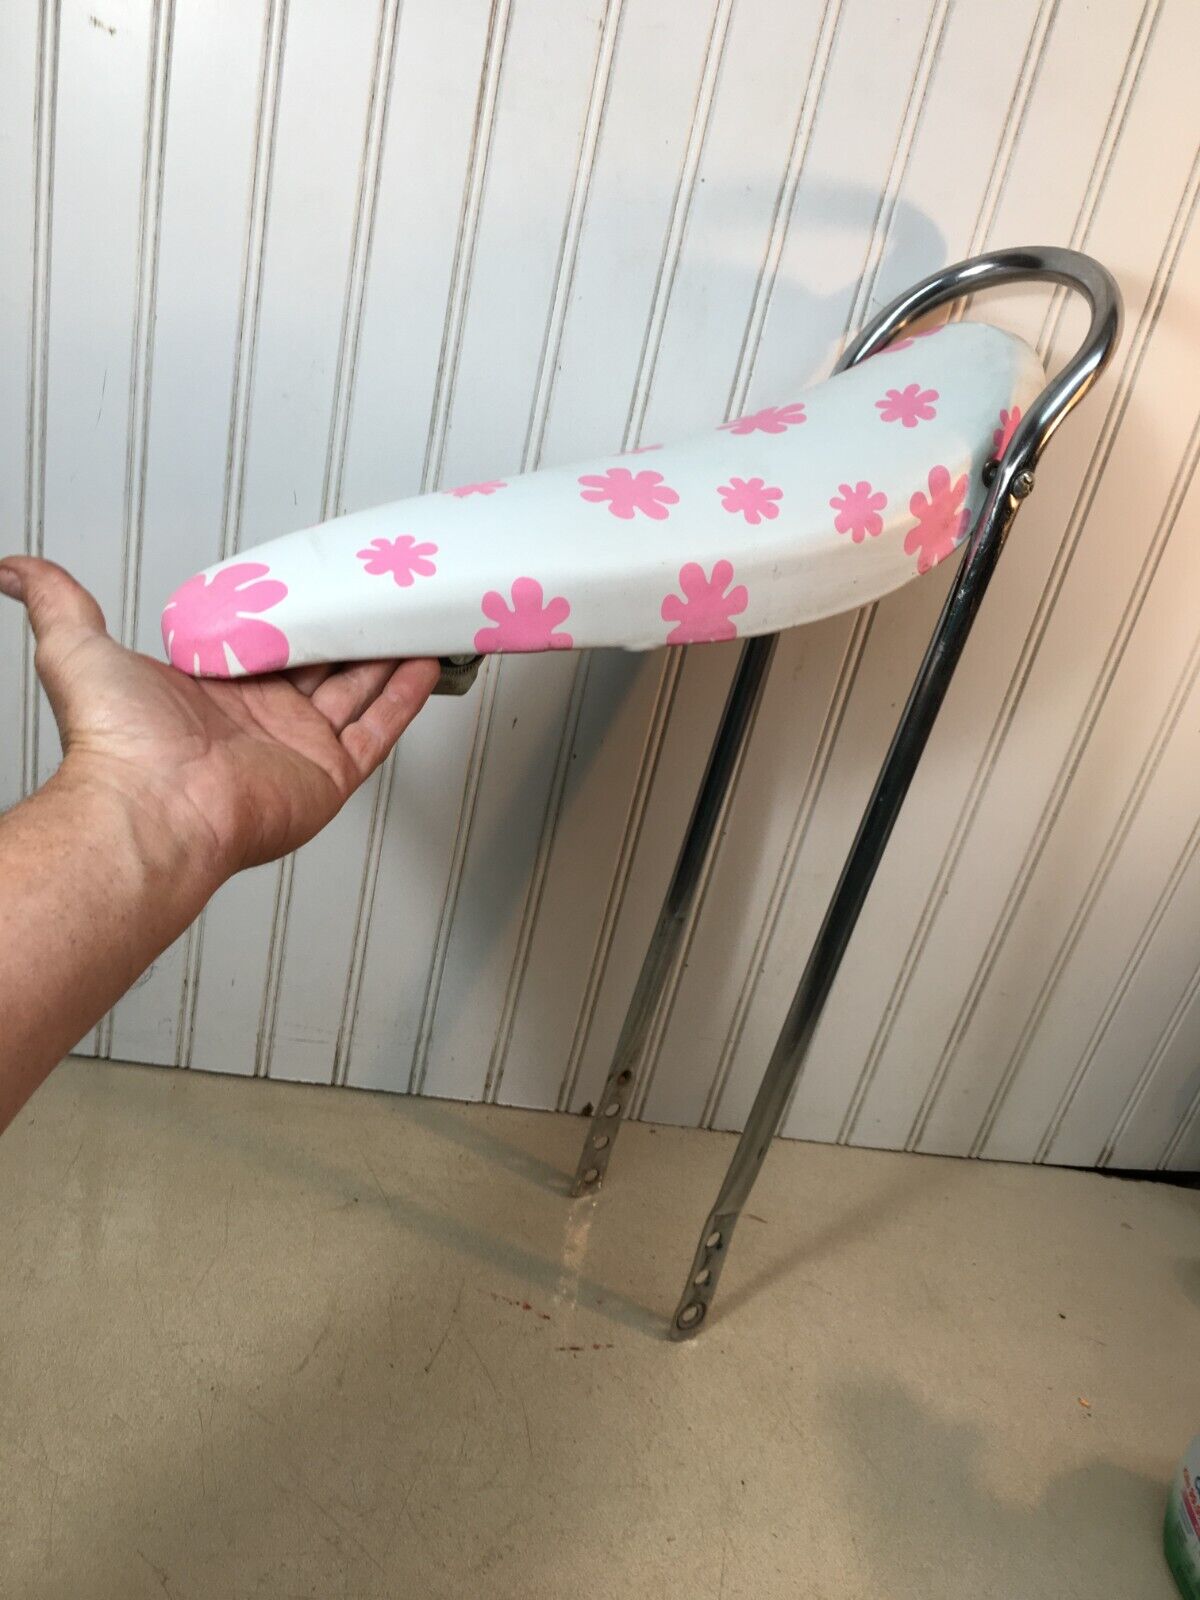 VINTAGE MUSCLE BIKE BANANA Whit with Pink Flowers SISSY BAR  SEAT 16IN